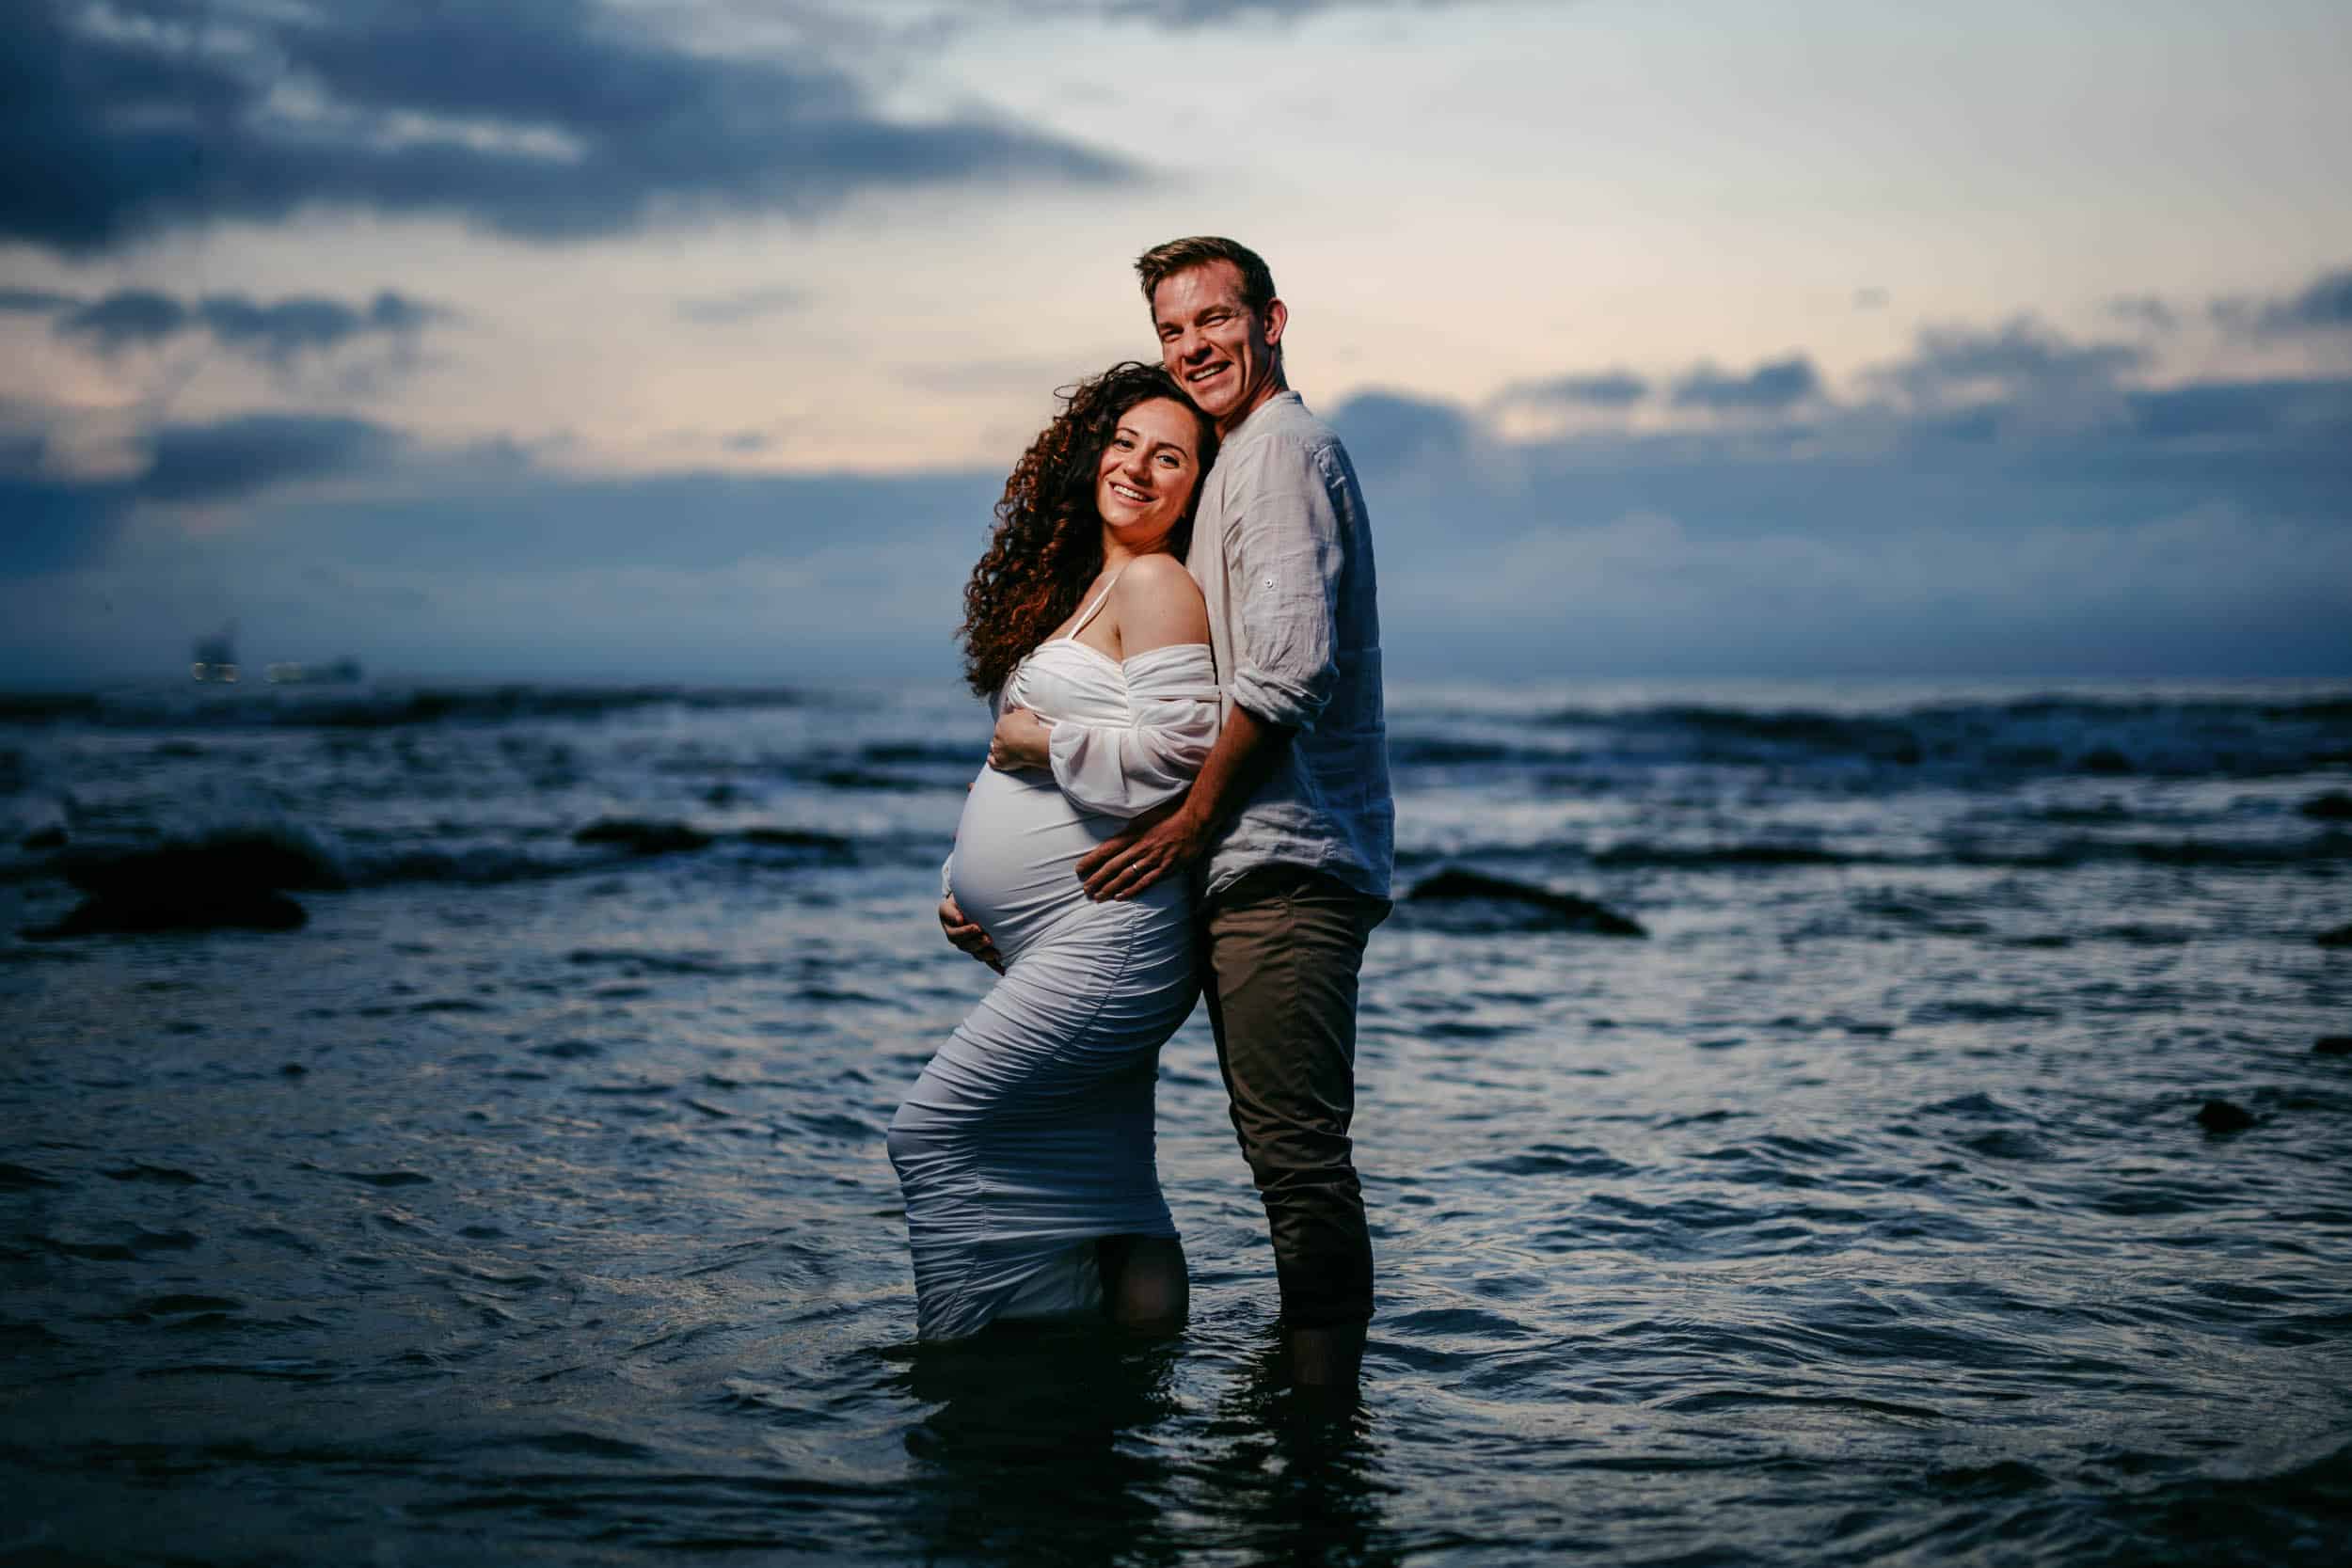 A maternity shoot couple standing in the ocean at sunset.